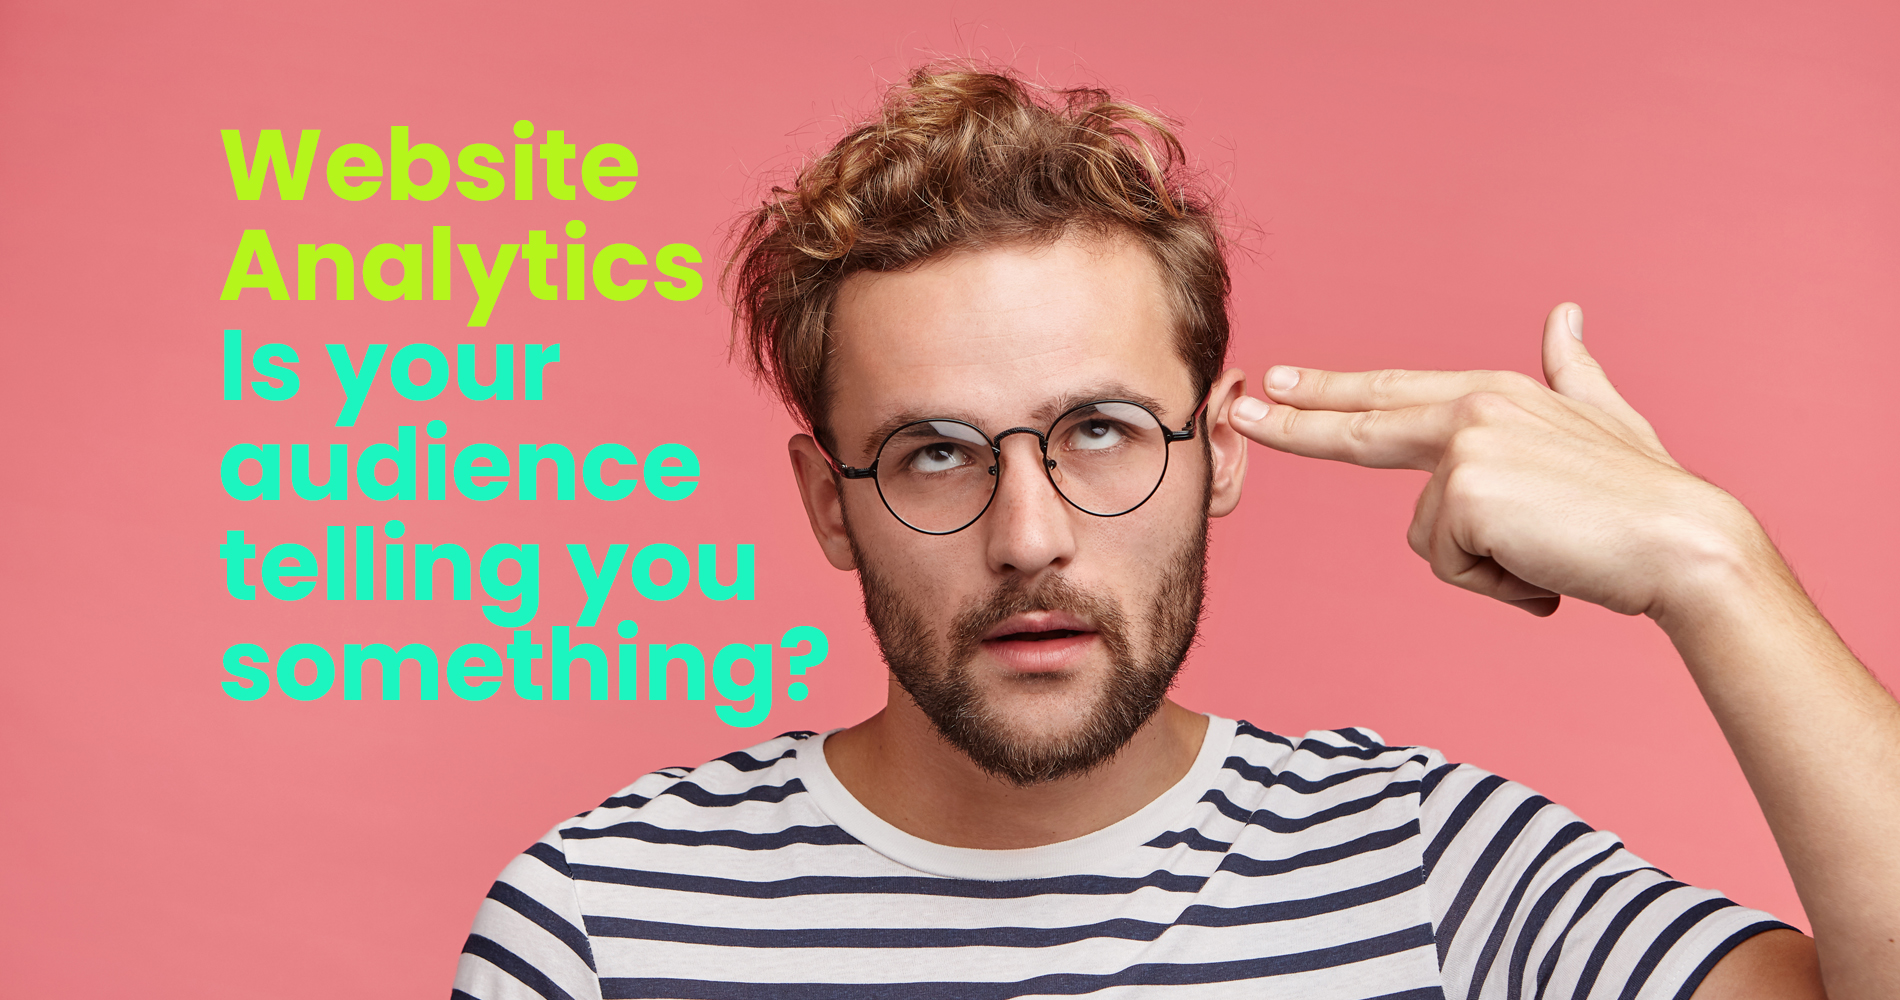 Website Analytics - Is your audience telling you something?